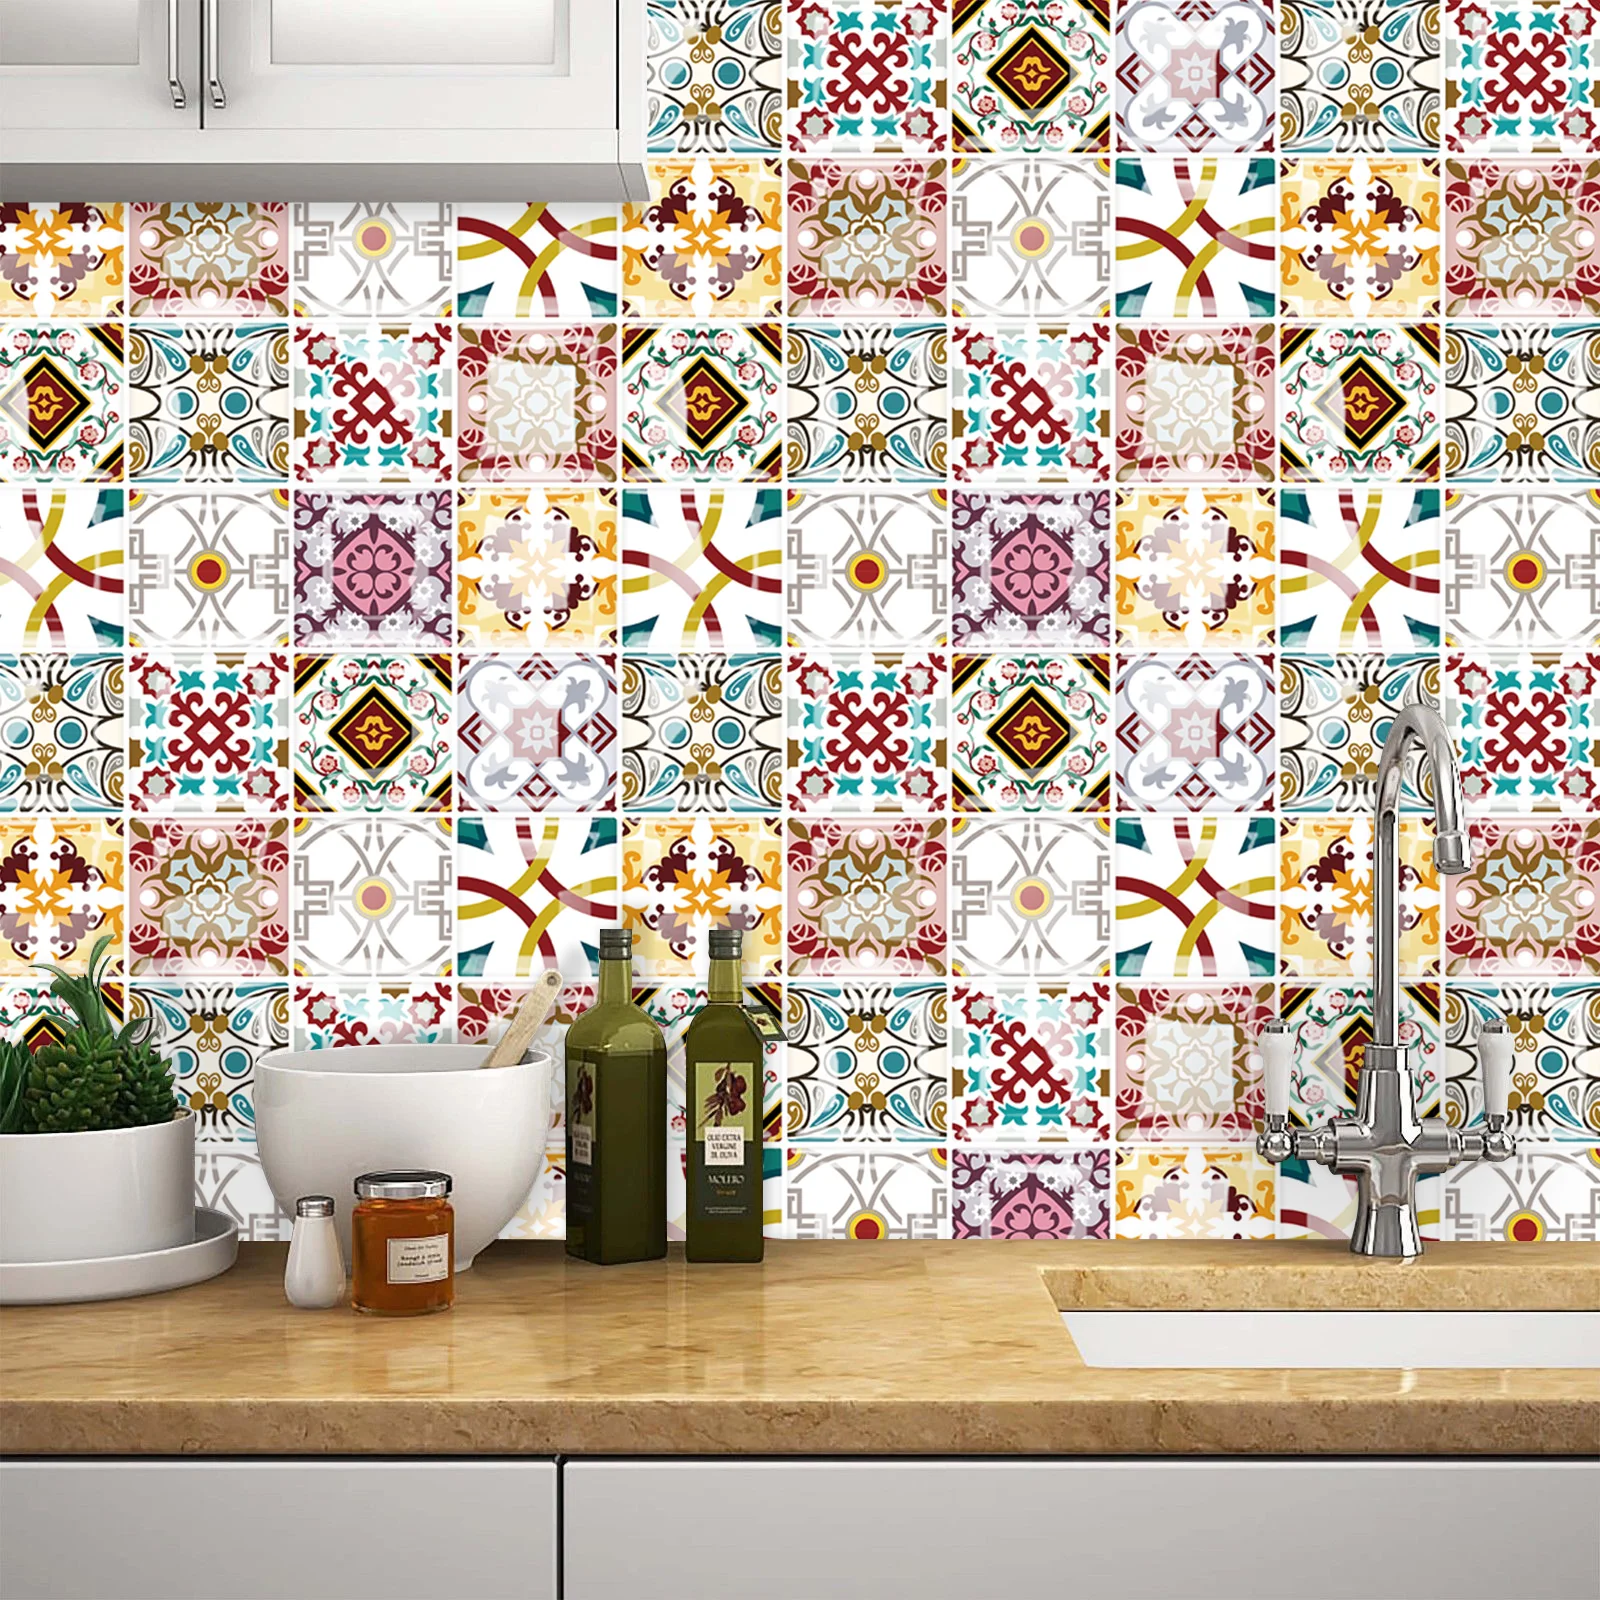 High Quality Home Luxury Self Adhesive Hexagon 3d Wallpaper For Kitchen  Backsplash From China Supplier - Buy Wallpaper For Teenage Adult,3d Design  Wallpaper,Wallpaper Suppliers In Dubai Product on 